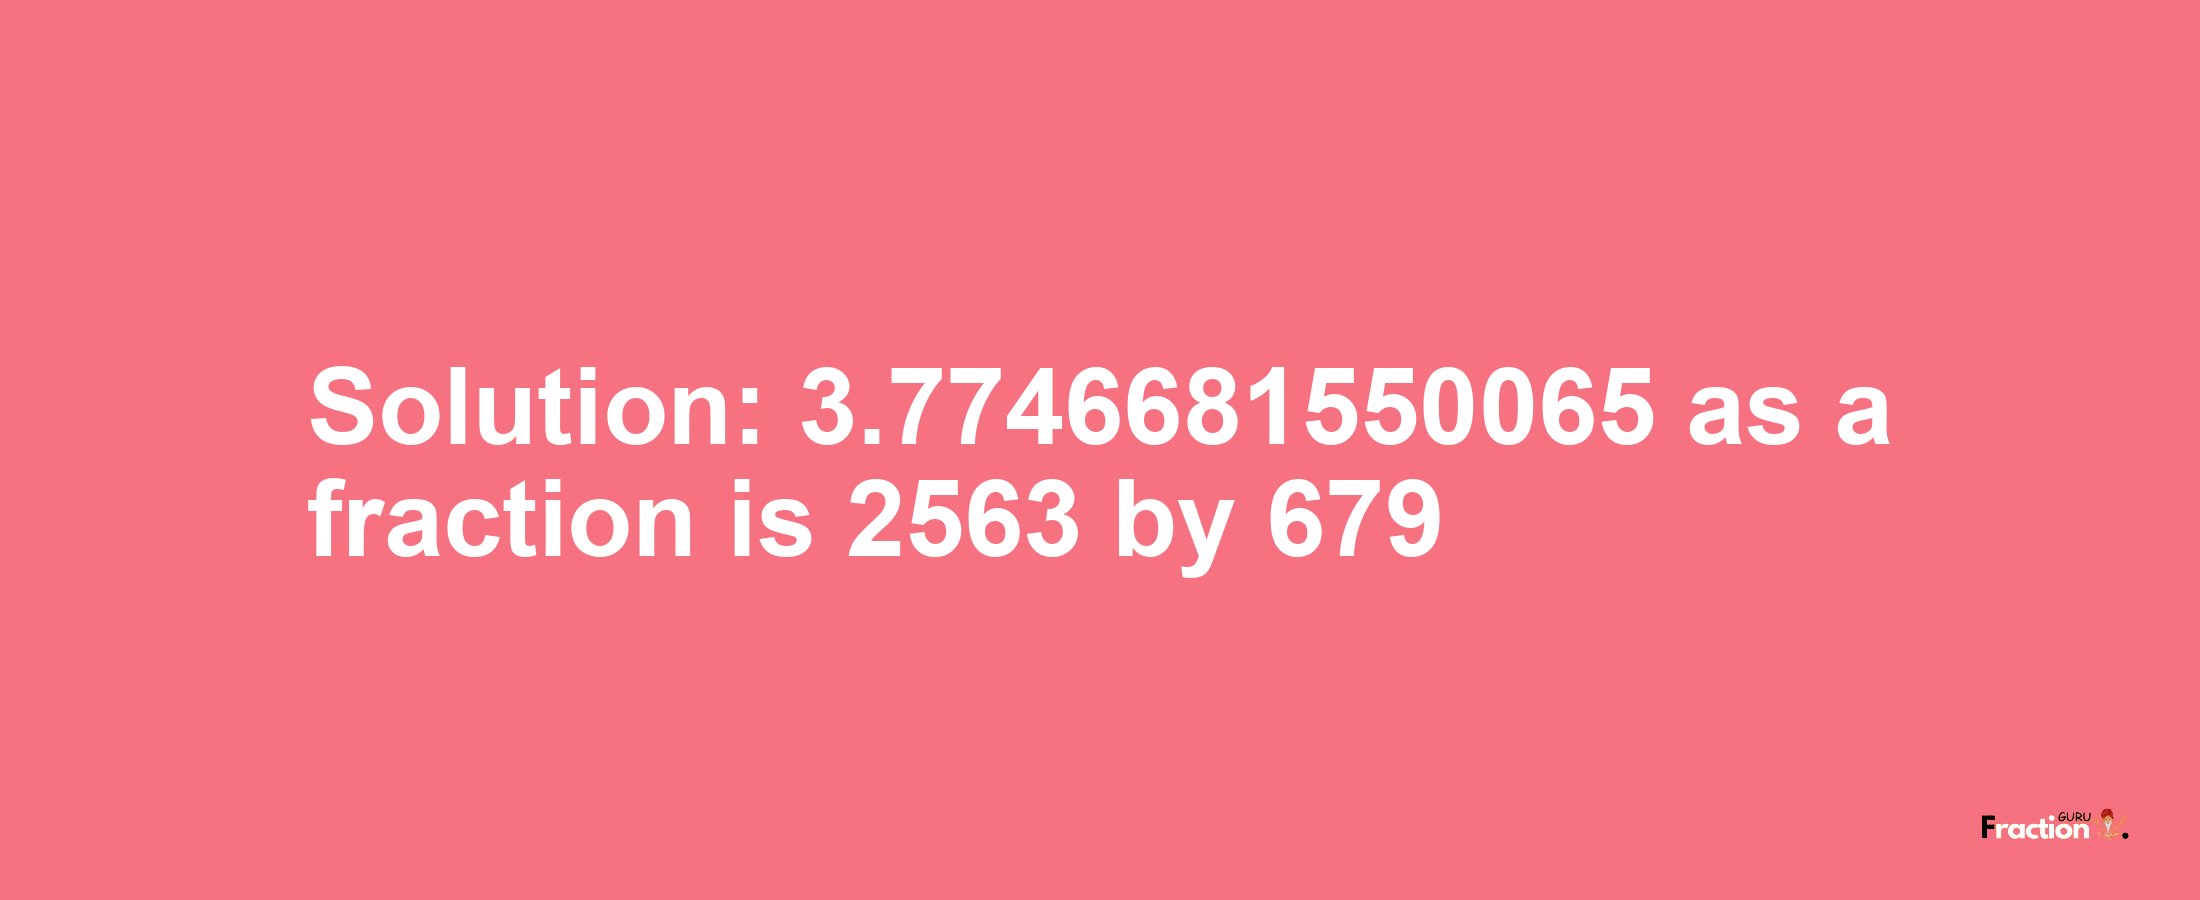 Solution:3.7746681550065 as a fraction is 2563/679